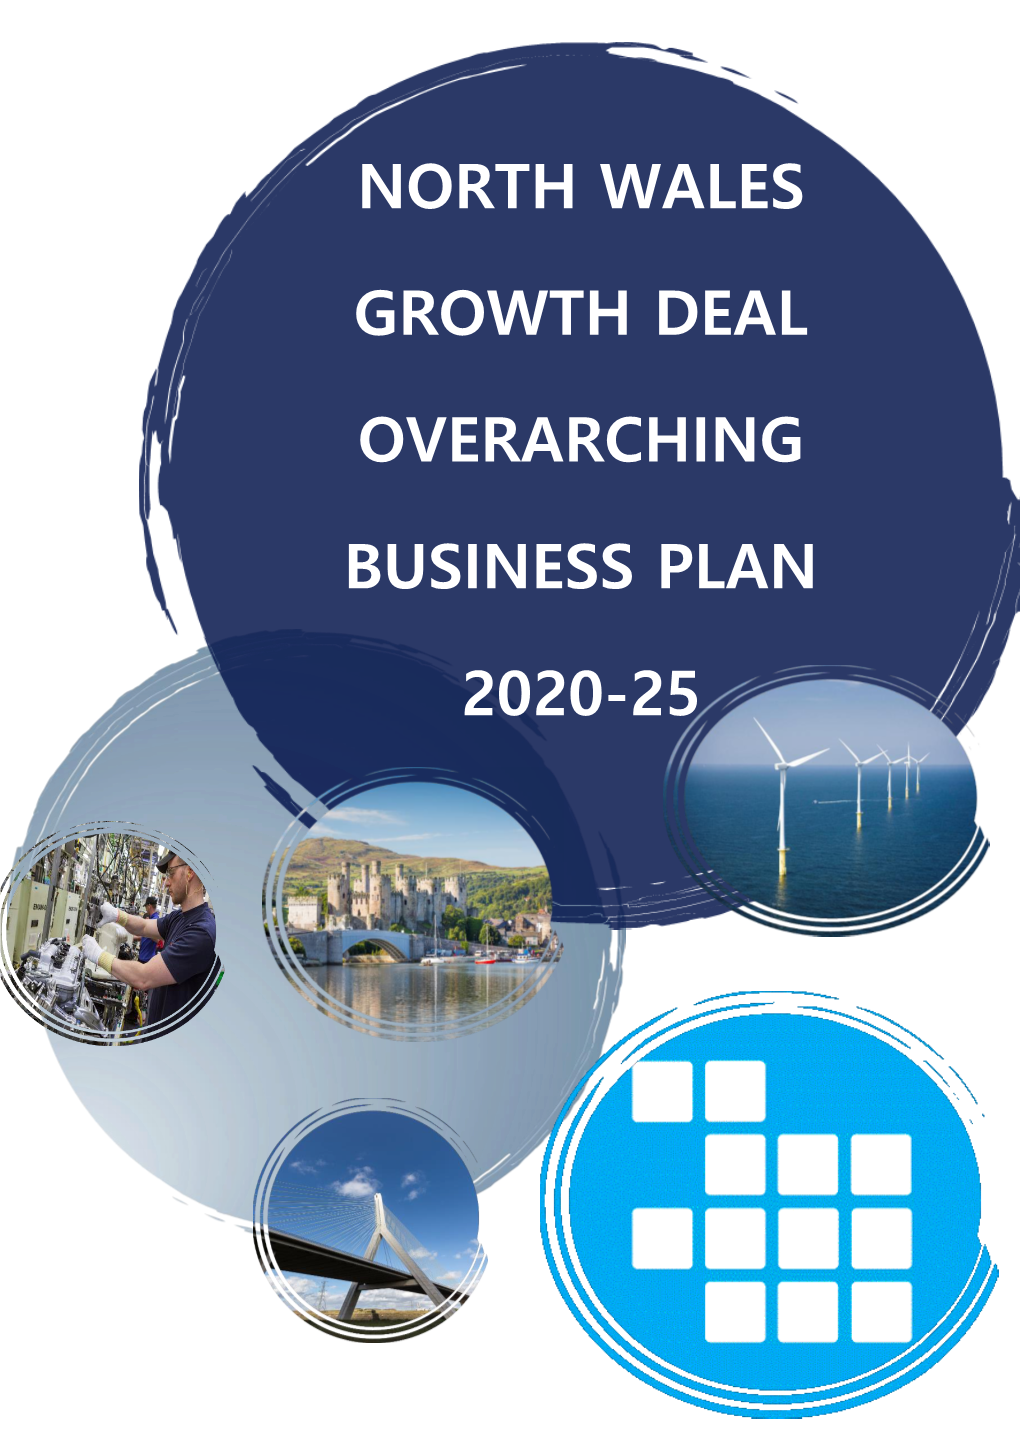 North Wales Growth Deal Overarching Business Plan